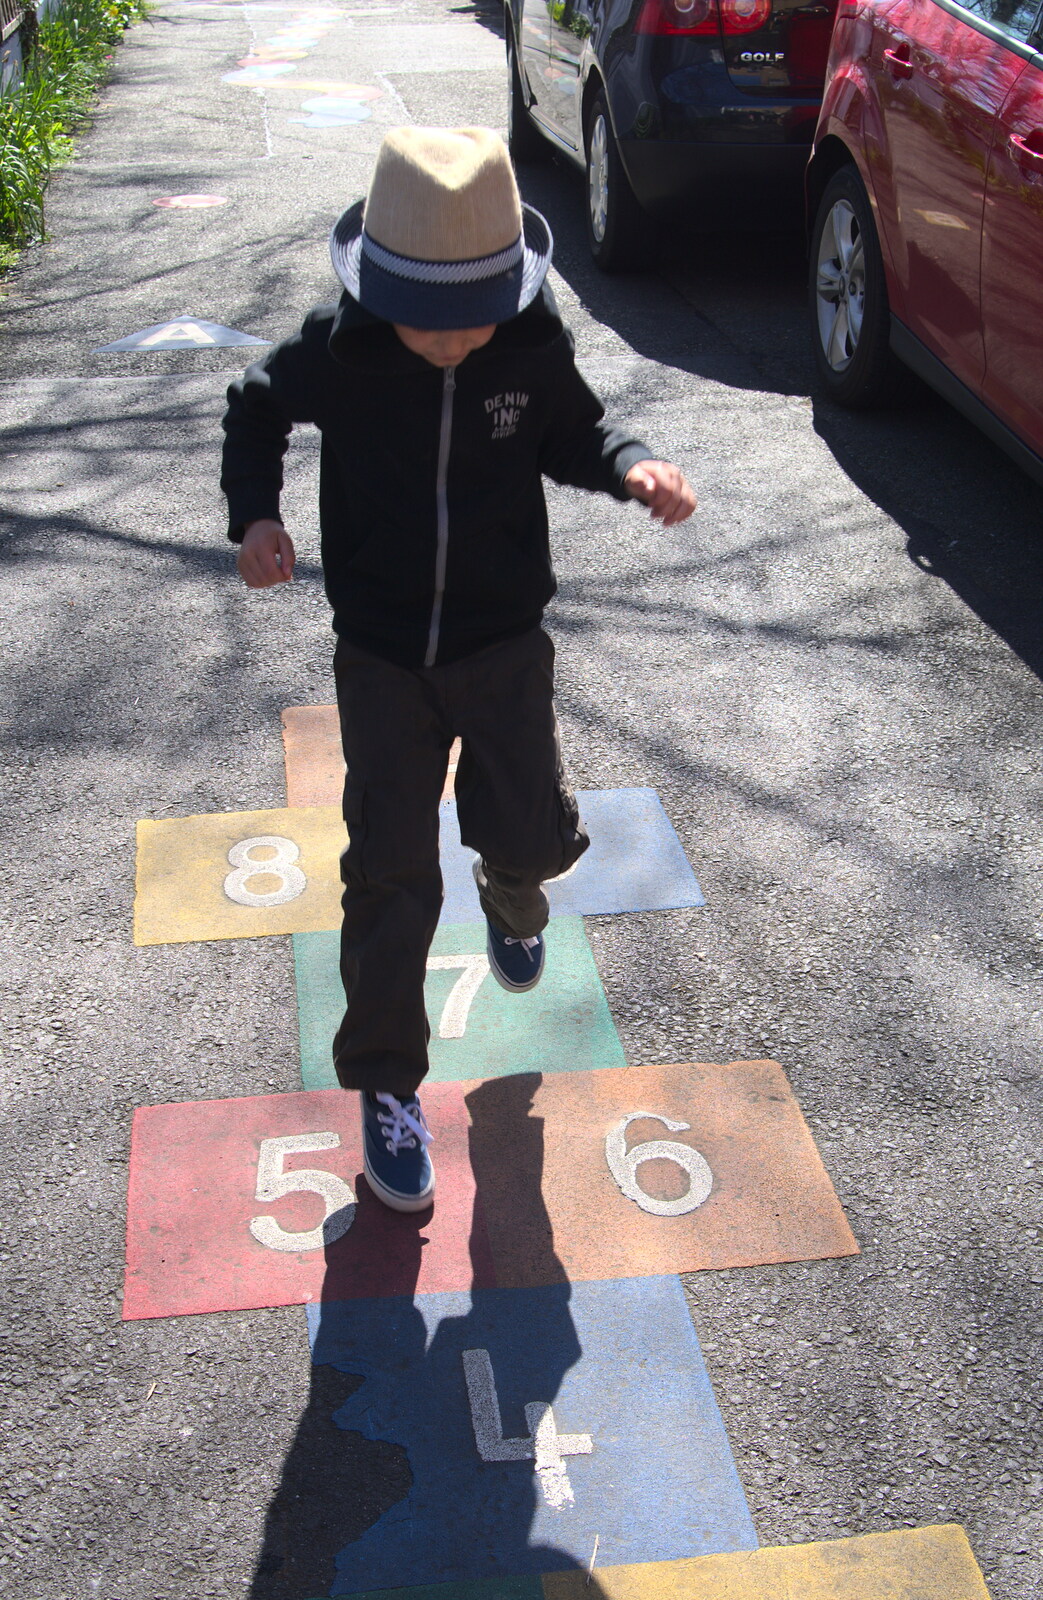 Fred does more hopscotch from Temple Bar and Dun Laoghaire, Dublin, Ireland - 16th April 2015